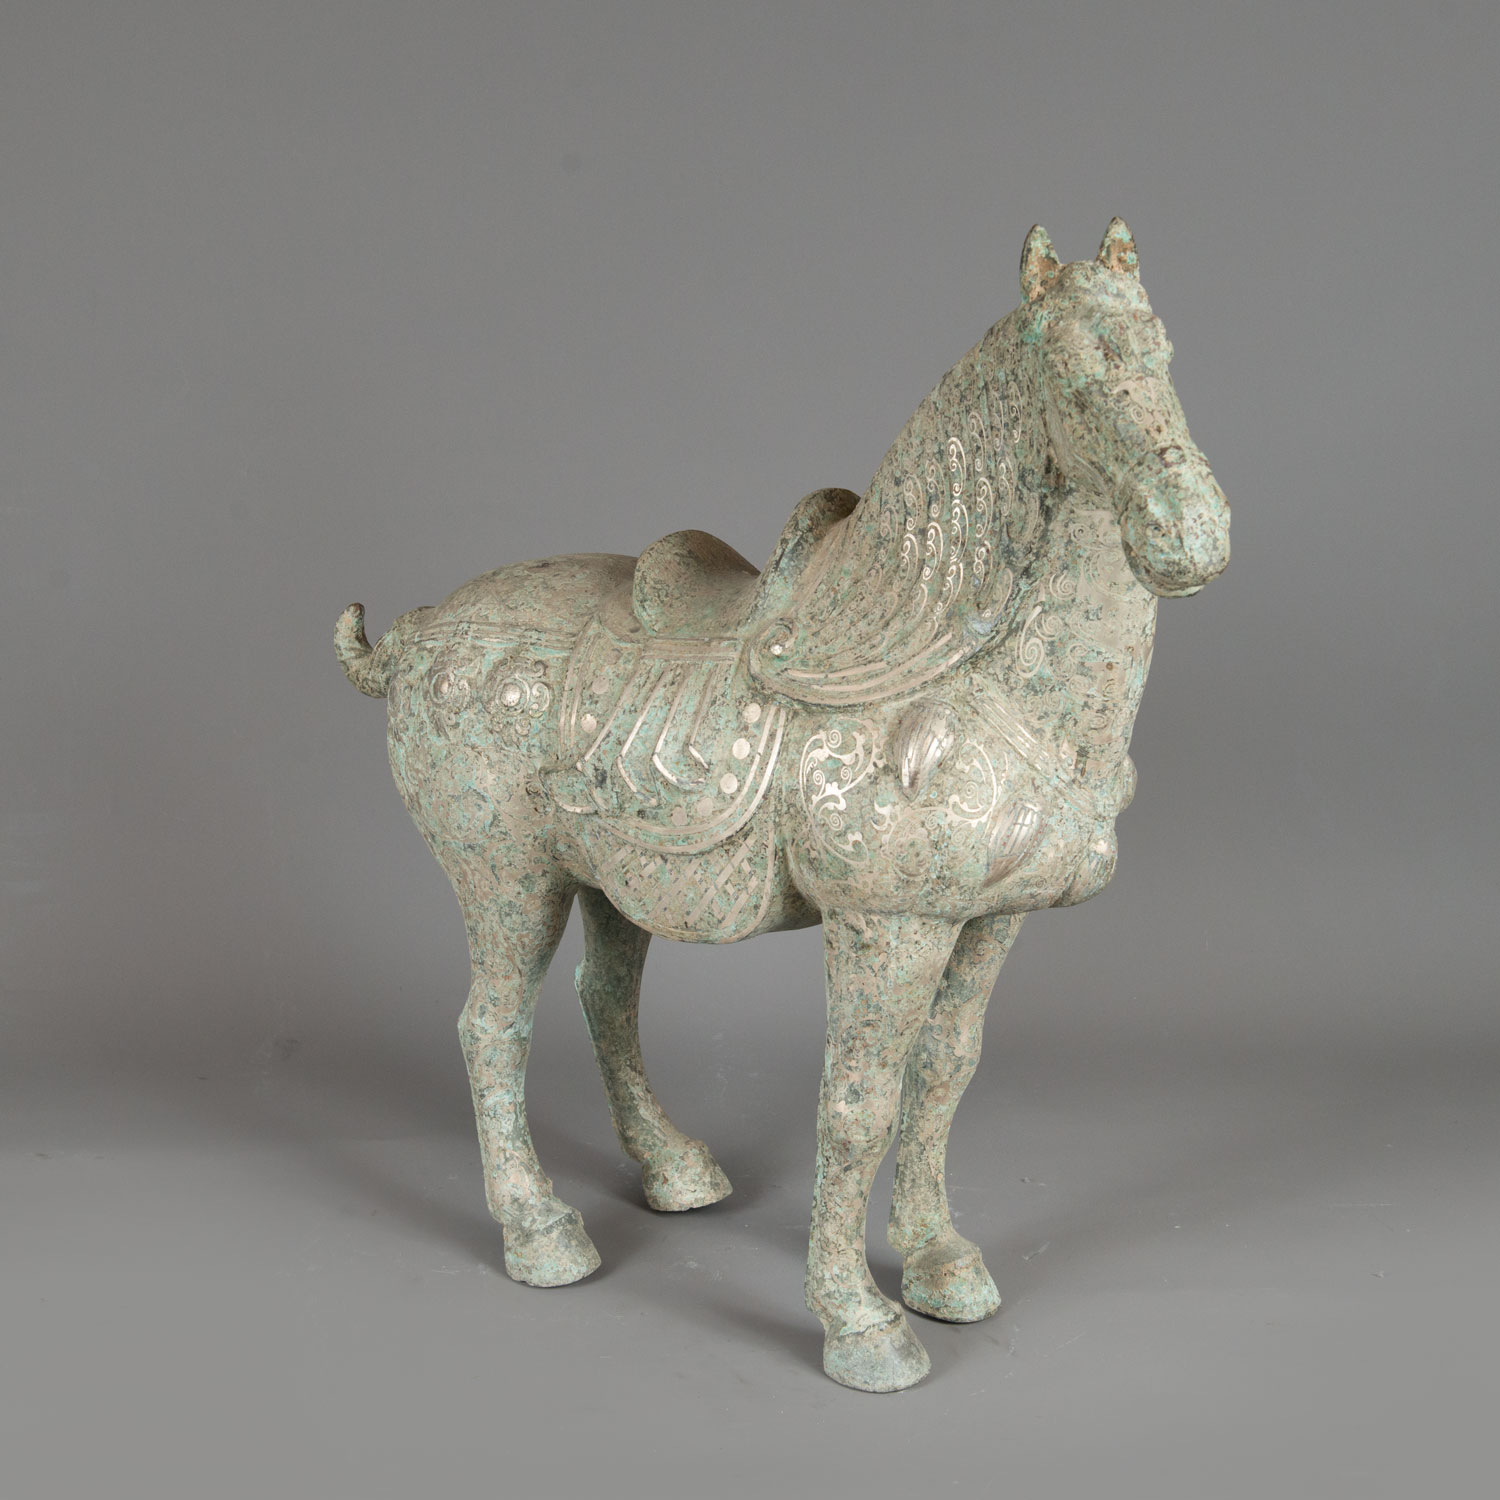 Archaic Chinese horse - Image 2 of 3